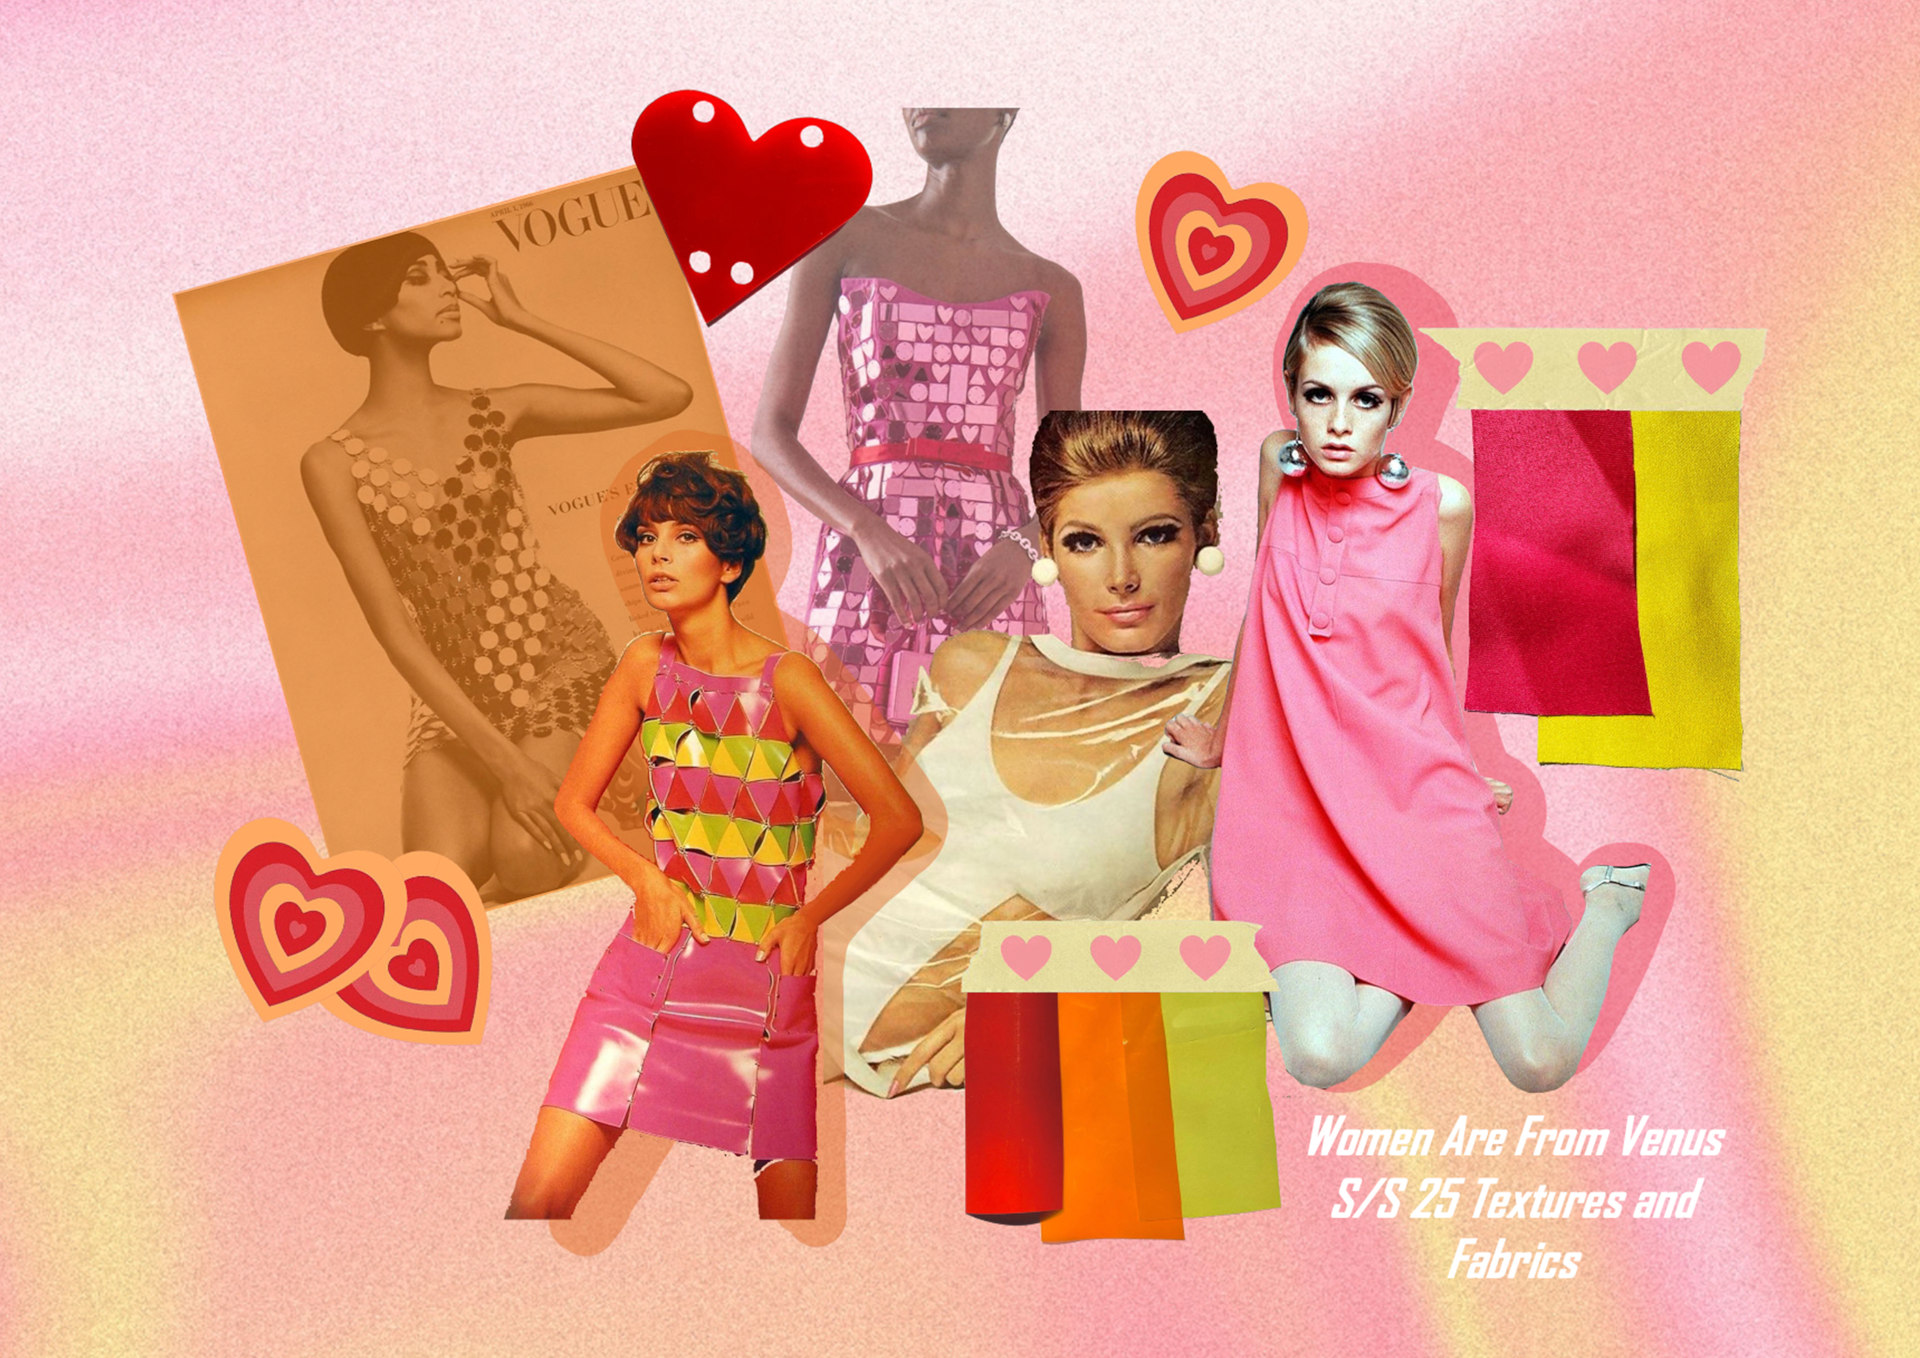 Images of women in 1960s-style outfits and hearts